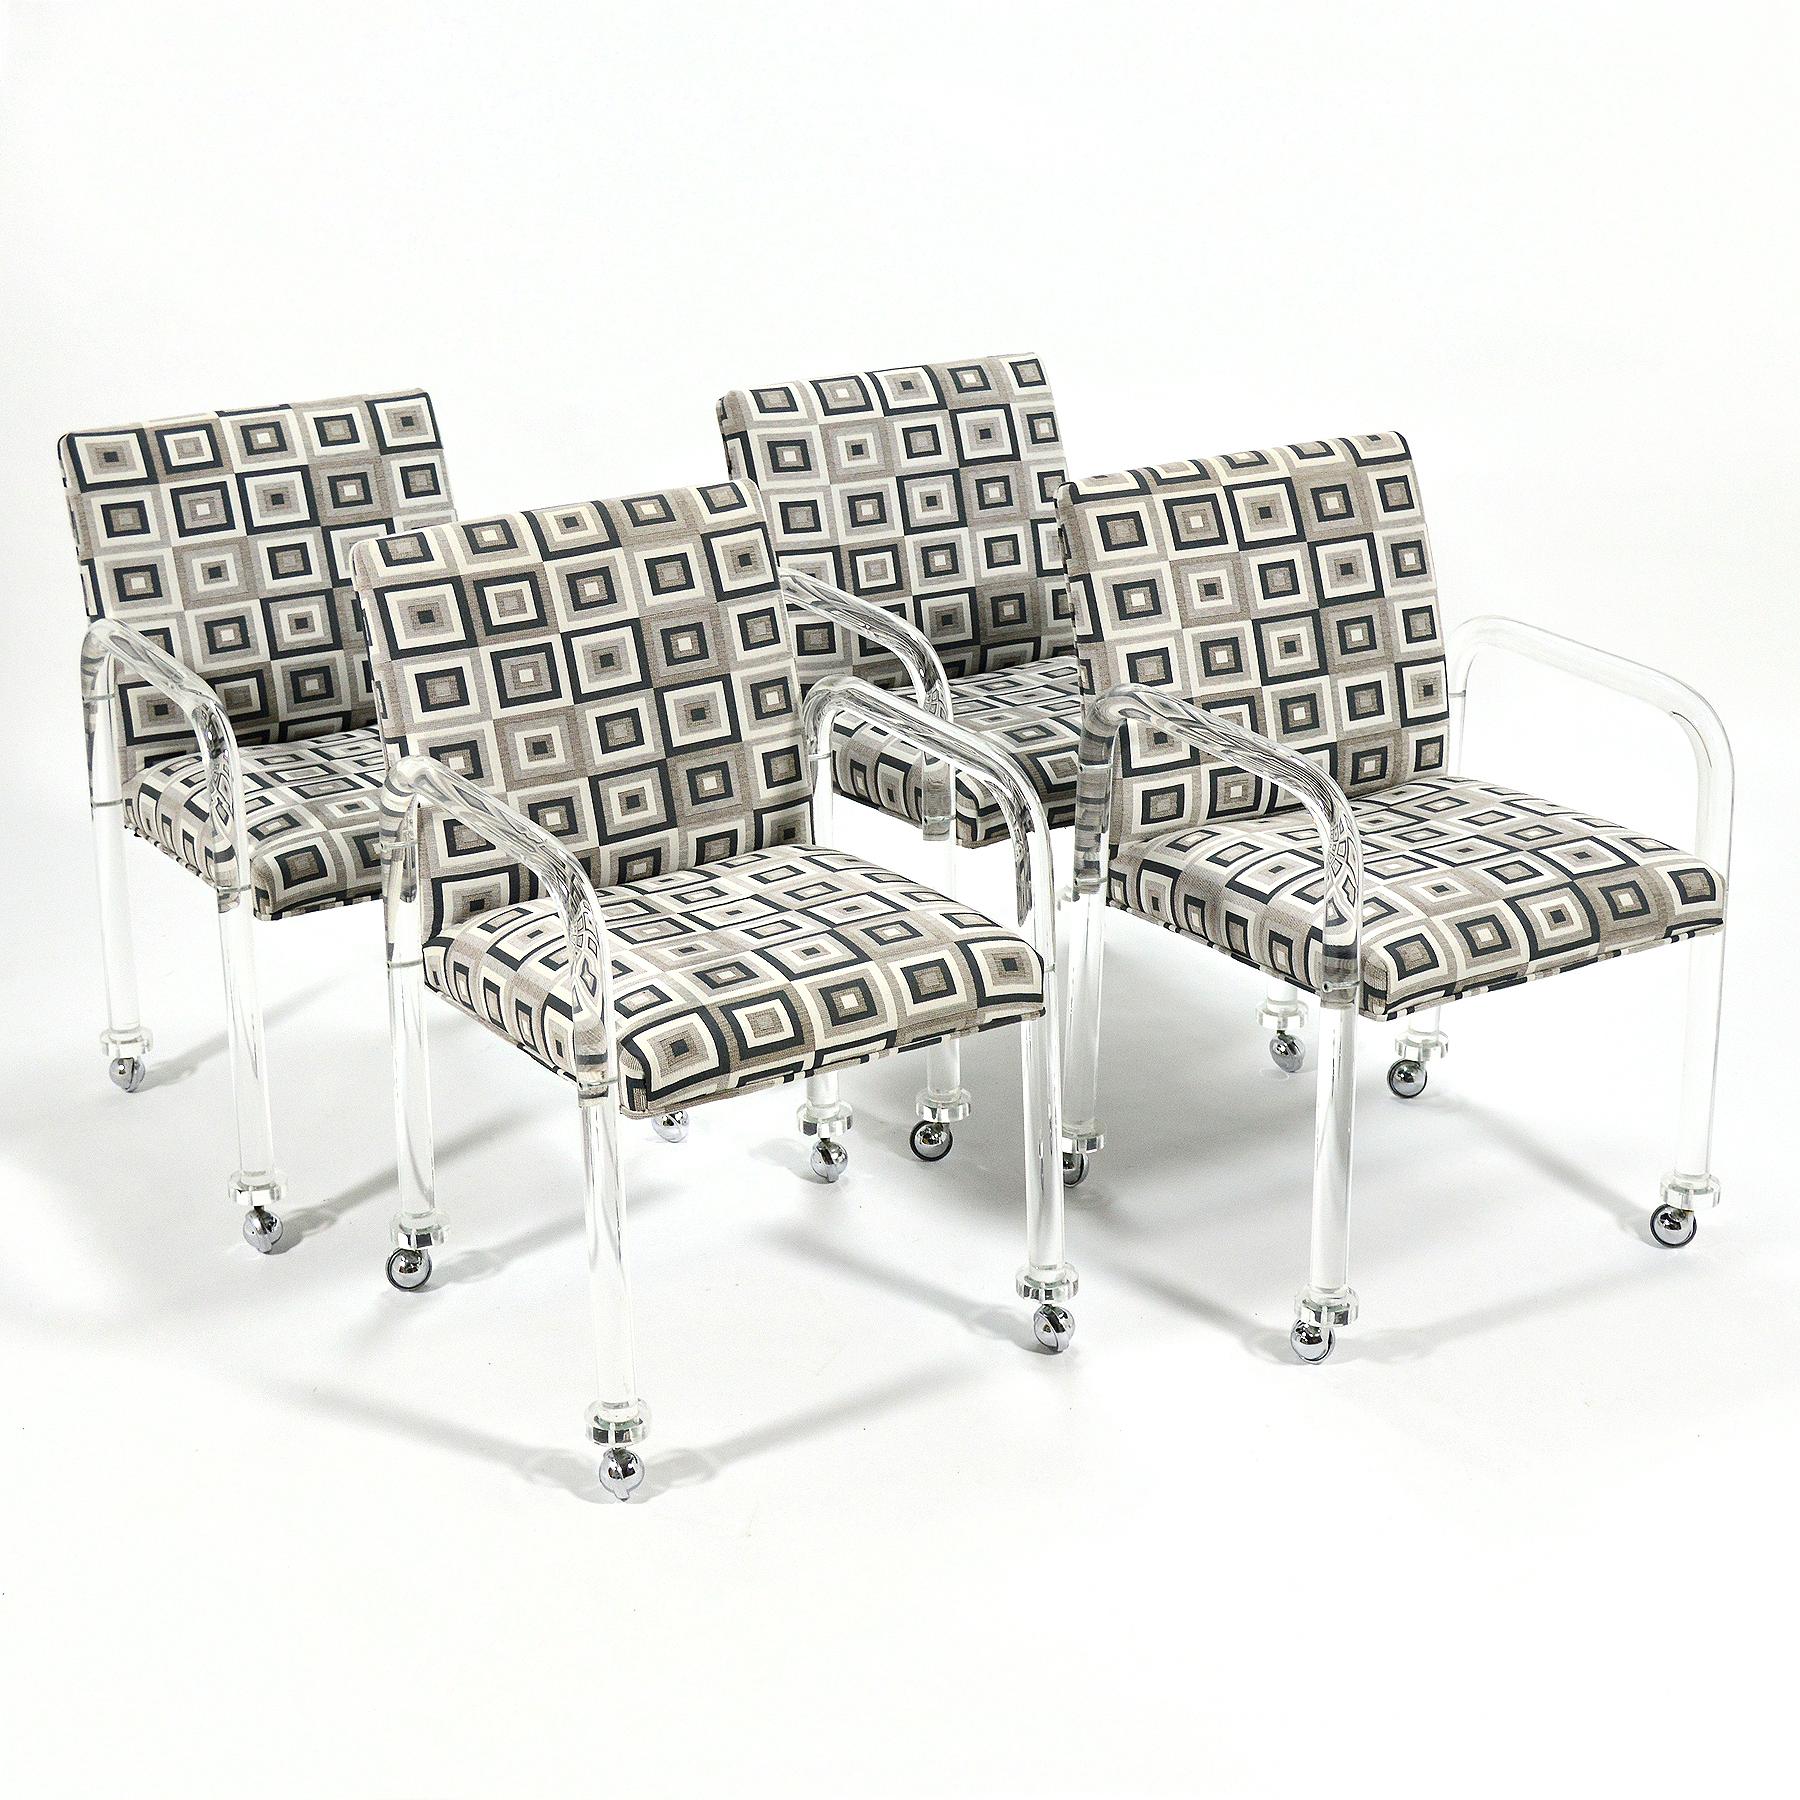 These handsome armchairs have tubular Lucite arms/ legs which support the upholstered seat/ back that features a fun geometric patterned fabric. Reminiscent of the work of Charles Hollis Jones, or Jeff Messerschmidt's 